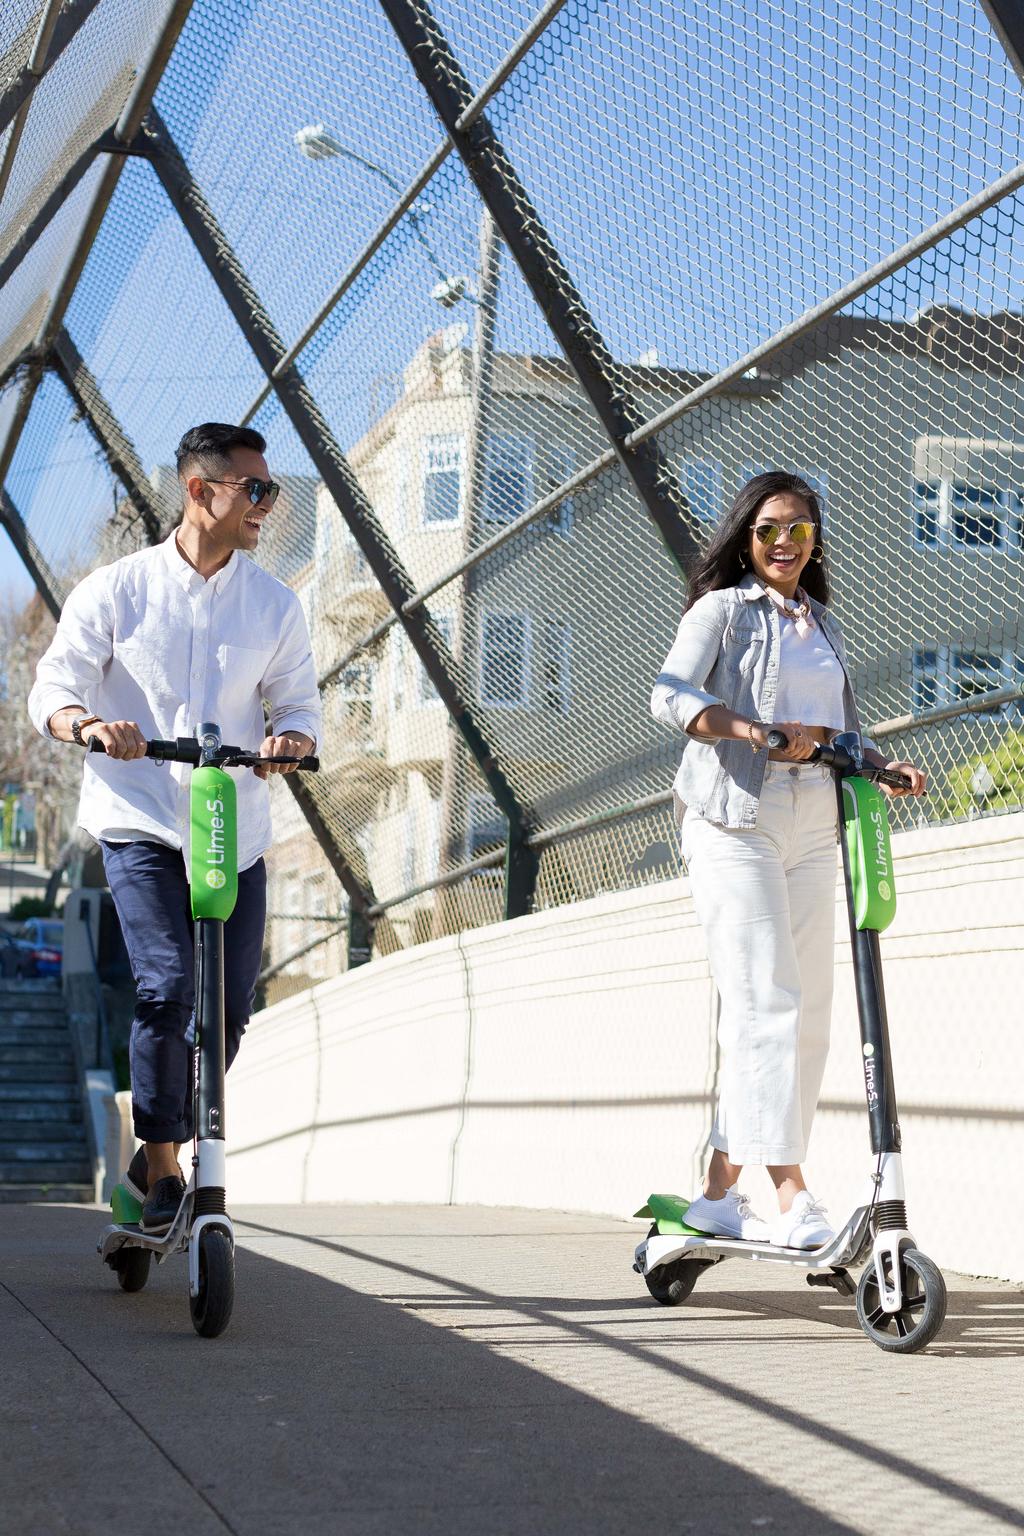 Lime scooter rental service debuts in Broward County South Florida Business Journal